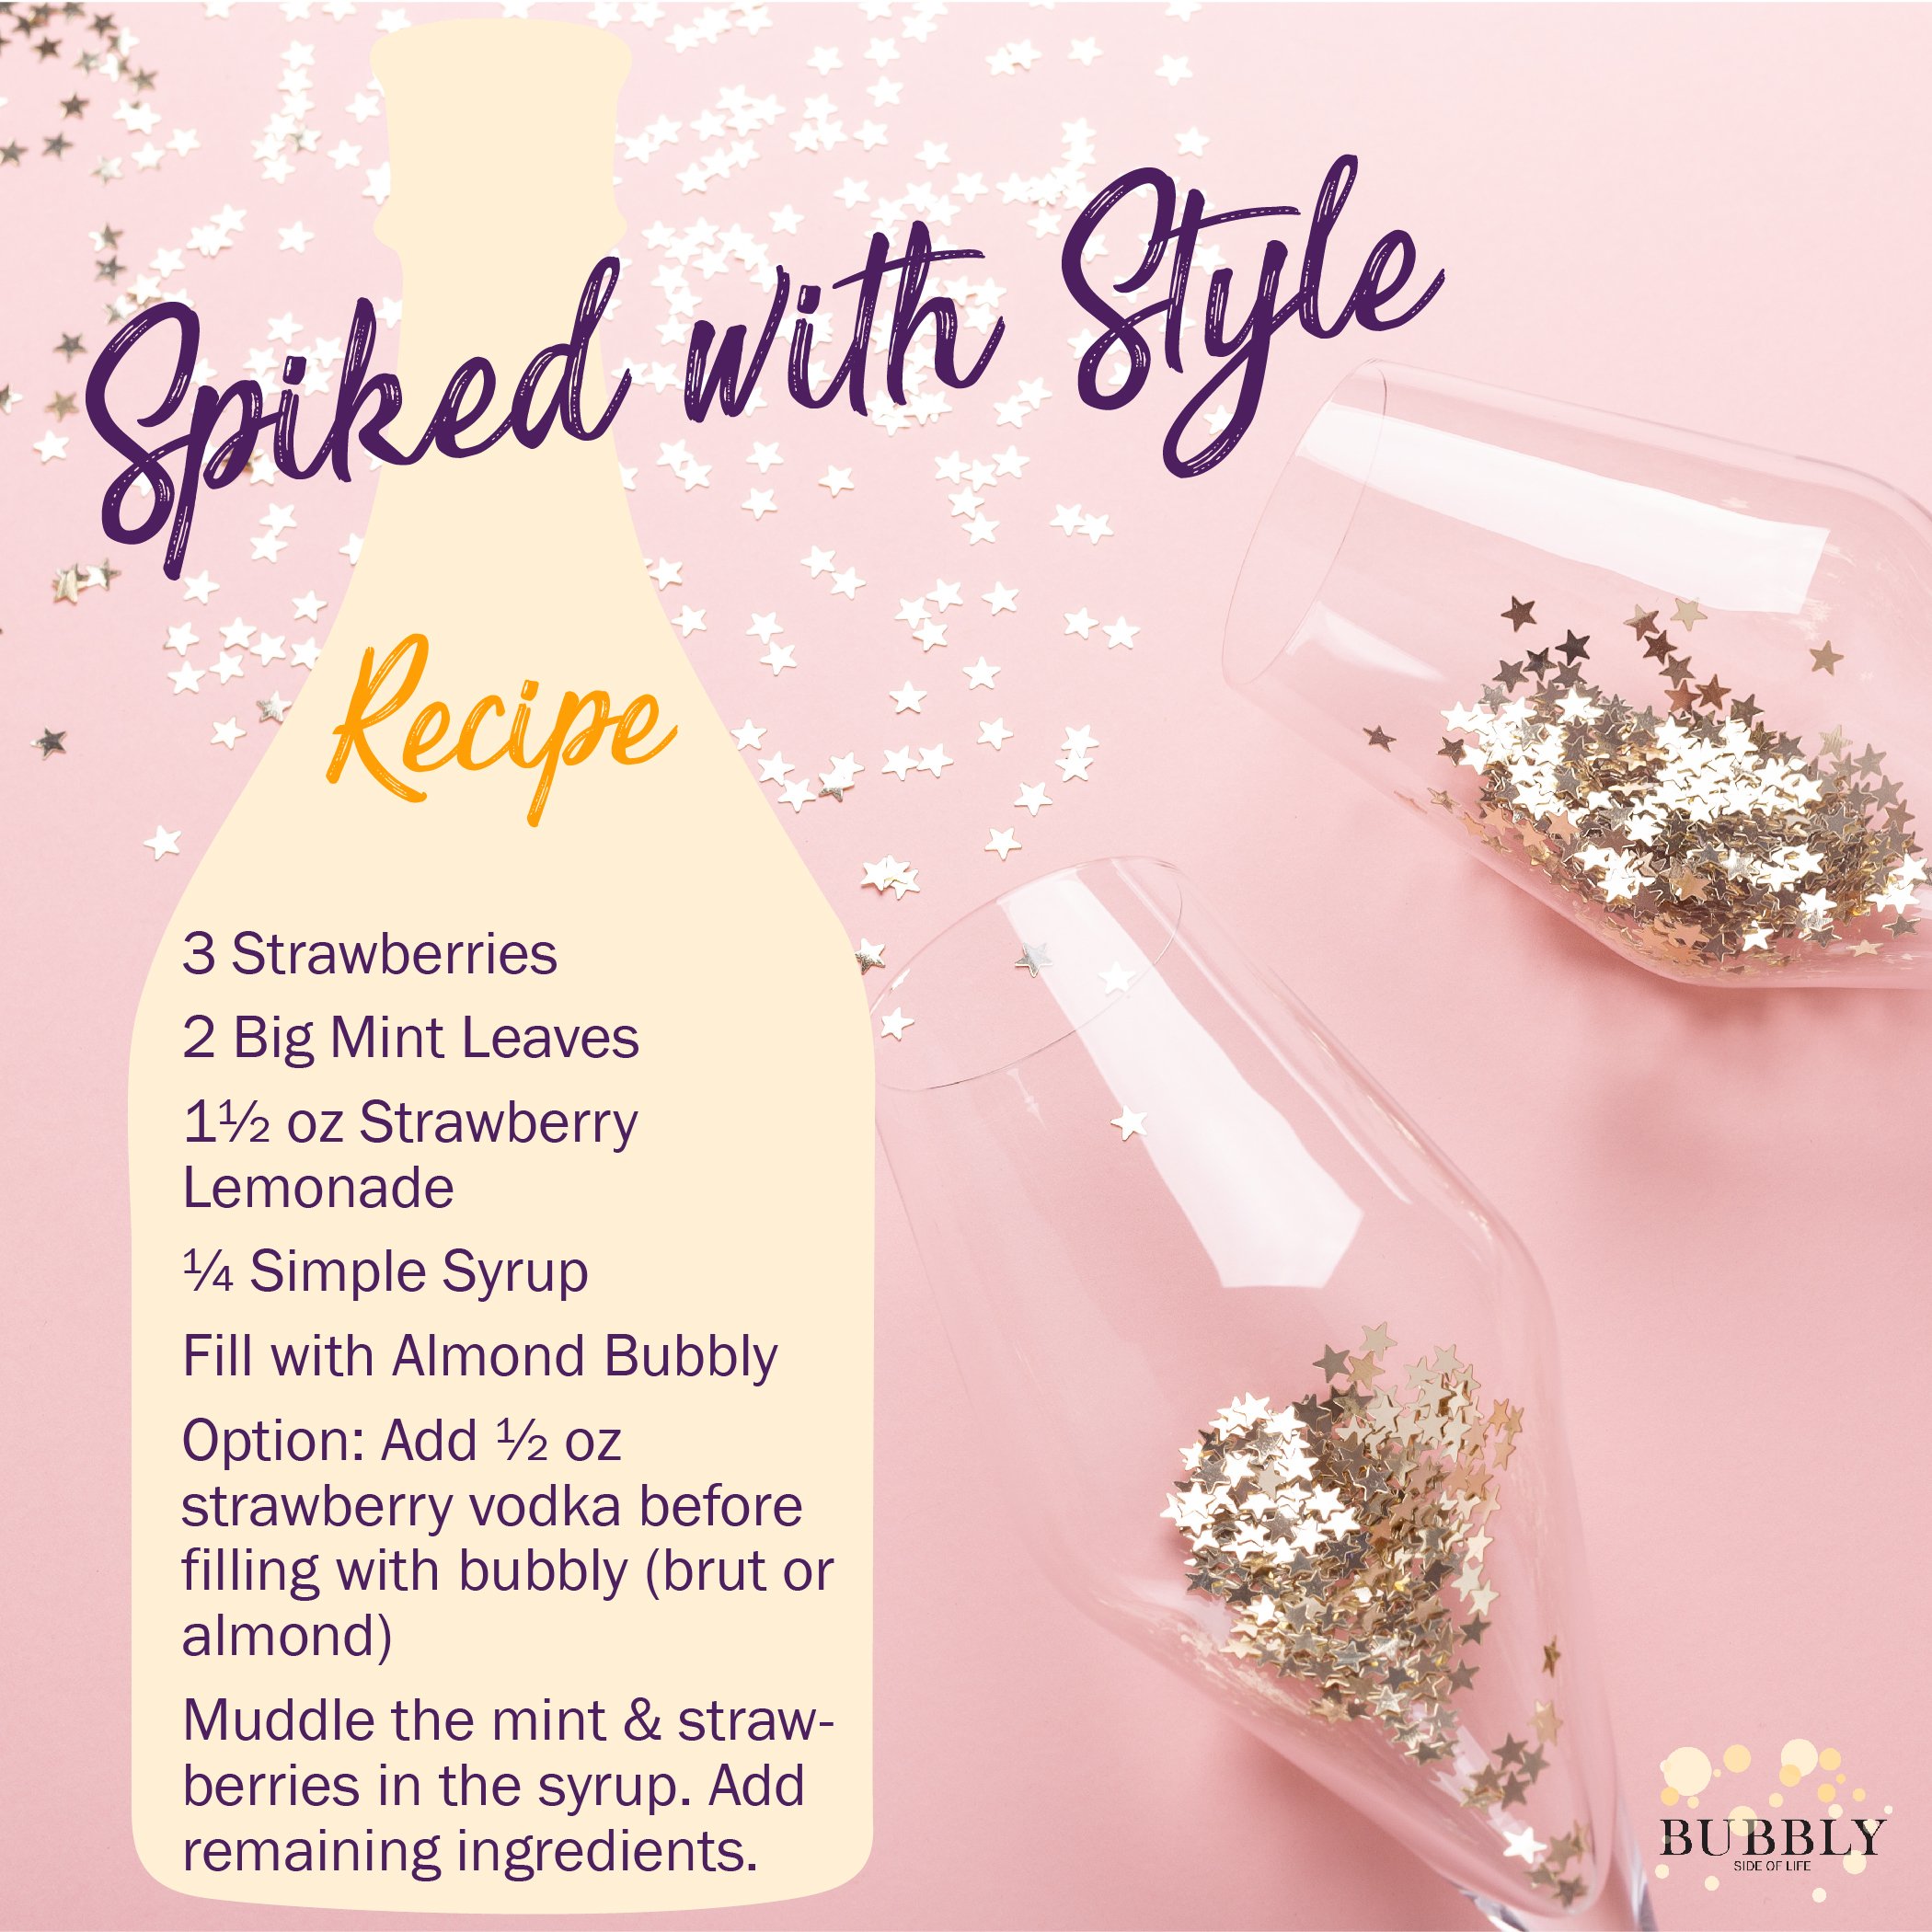 Spiked with Style Recipe Card